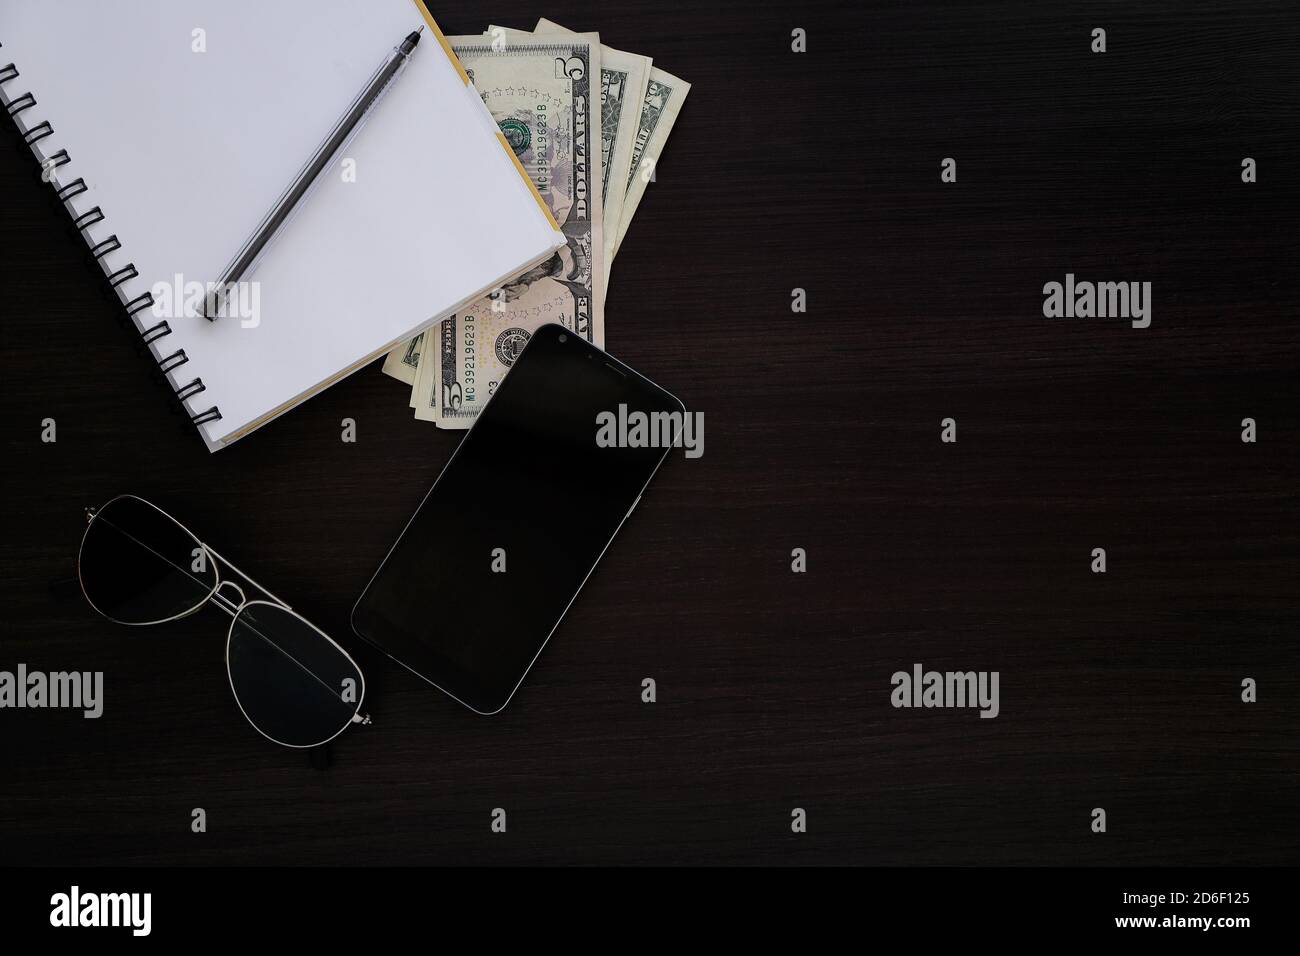 Dark wooden desk with objects. Top view of a notebook, money, cell, phone, pen and sunglasses. Stock Photo